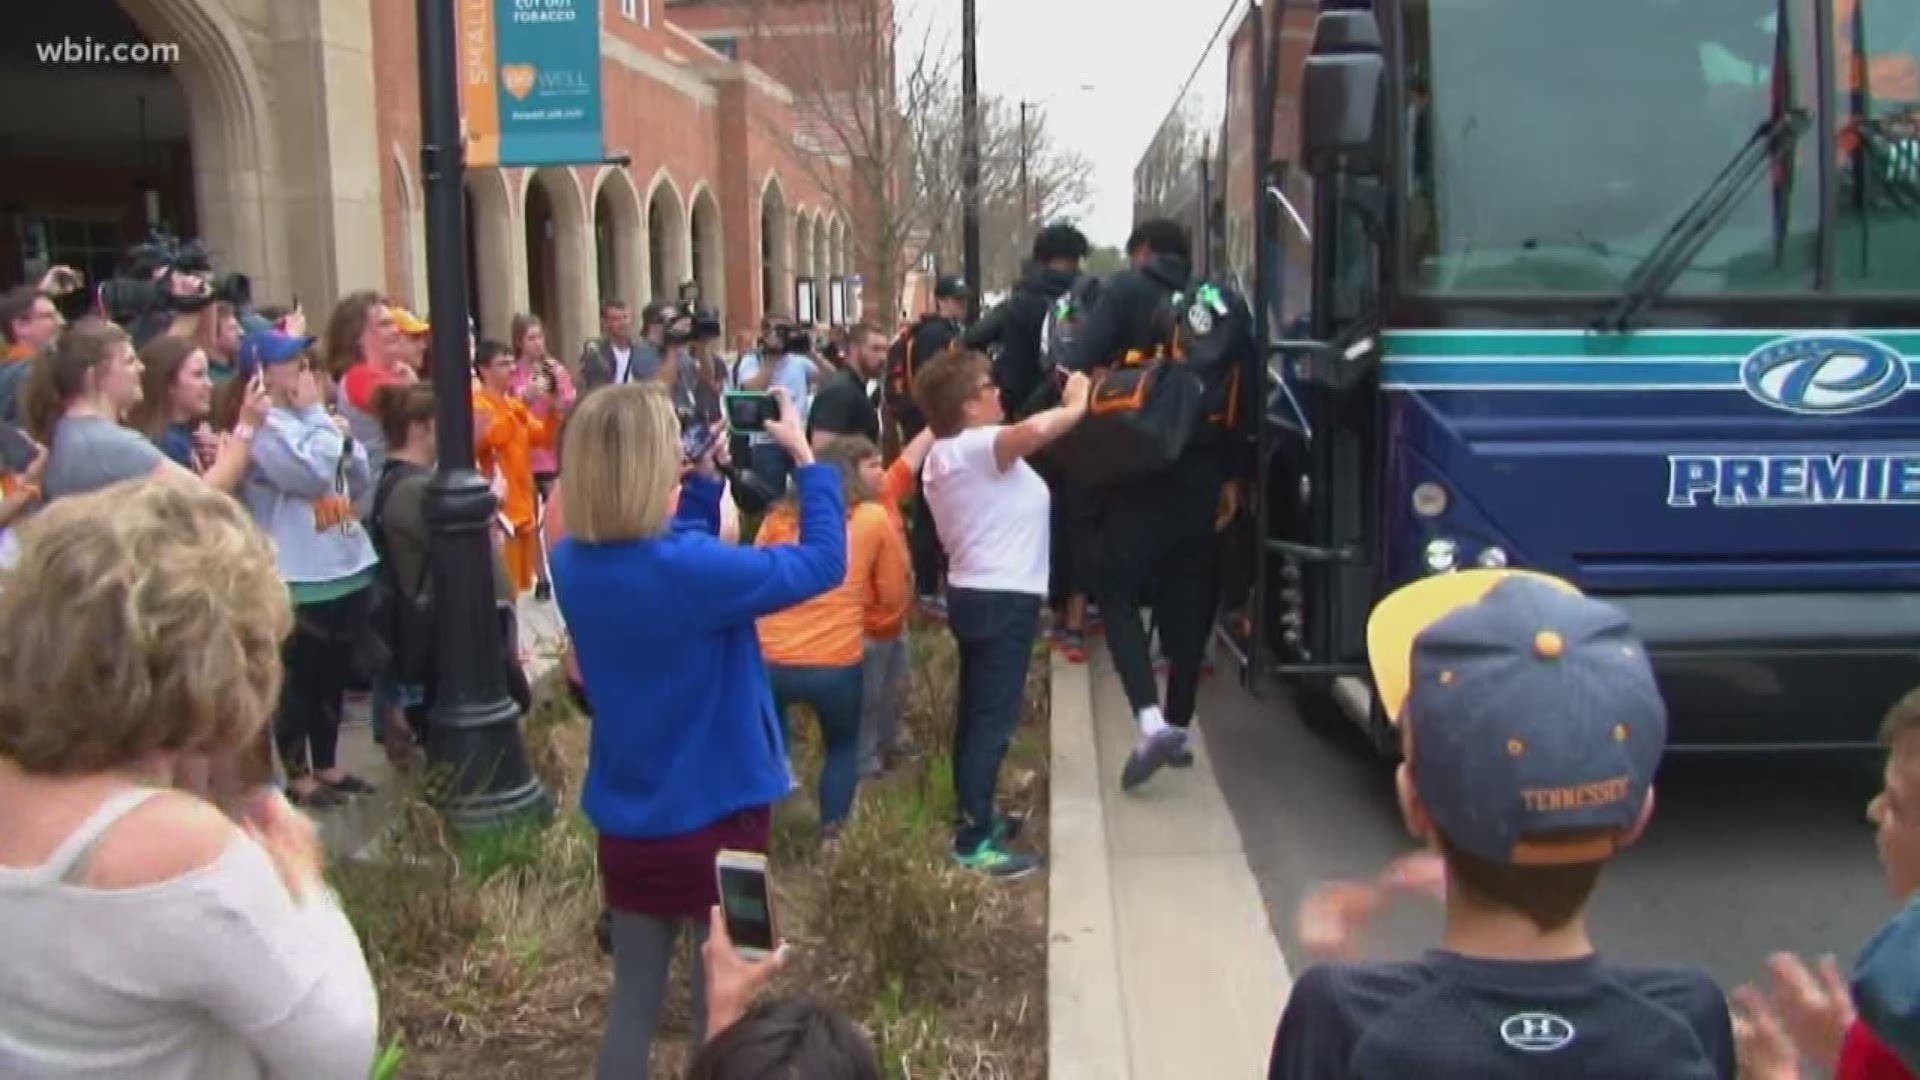 Nearly 100 fans greeted the Vols after a crushing loss in the Sweet Sixteen last night. They wanted to thank the team for an incredible season.